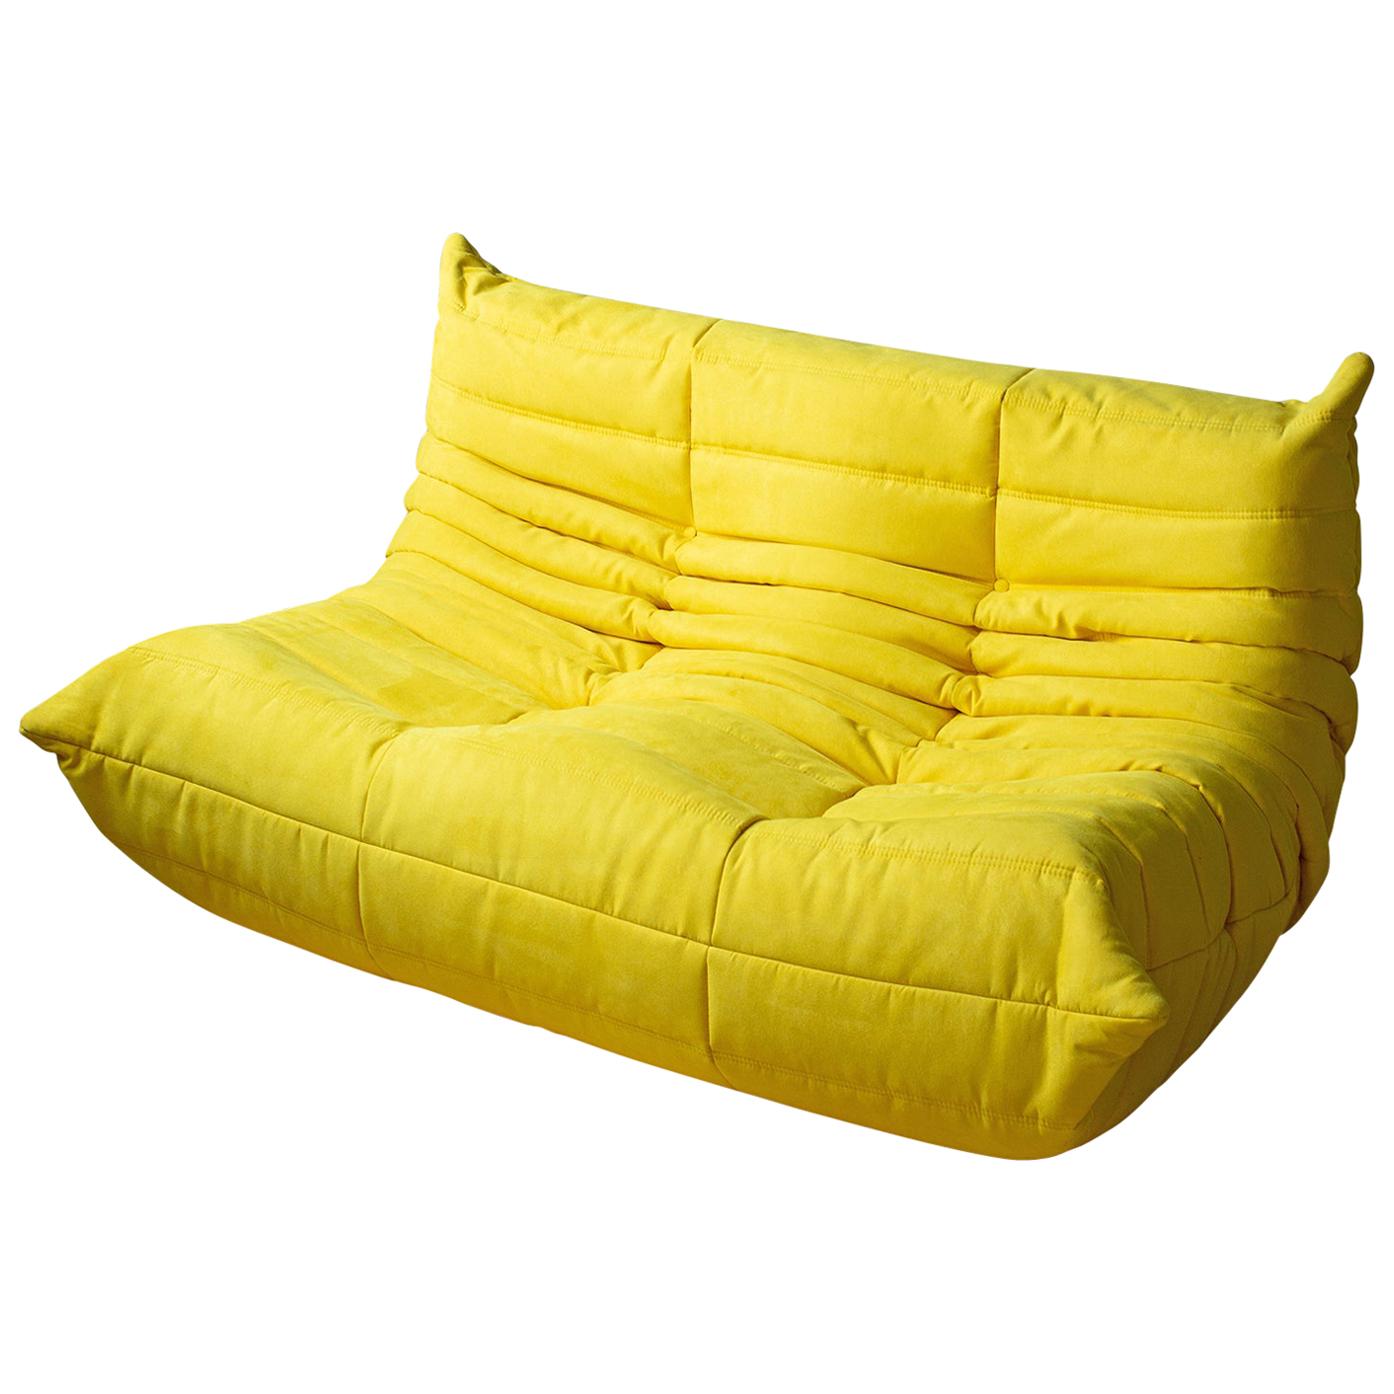 Togo 2-Seat Sofa in Yellow Microfibre by Michel Ducaroy for Ligne Roset For Sale